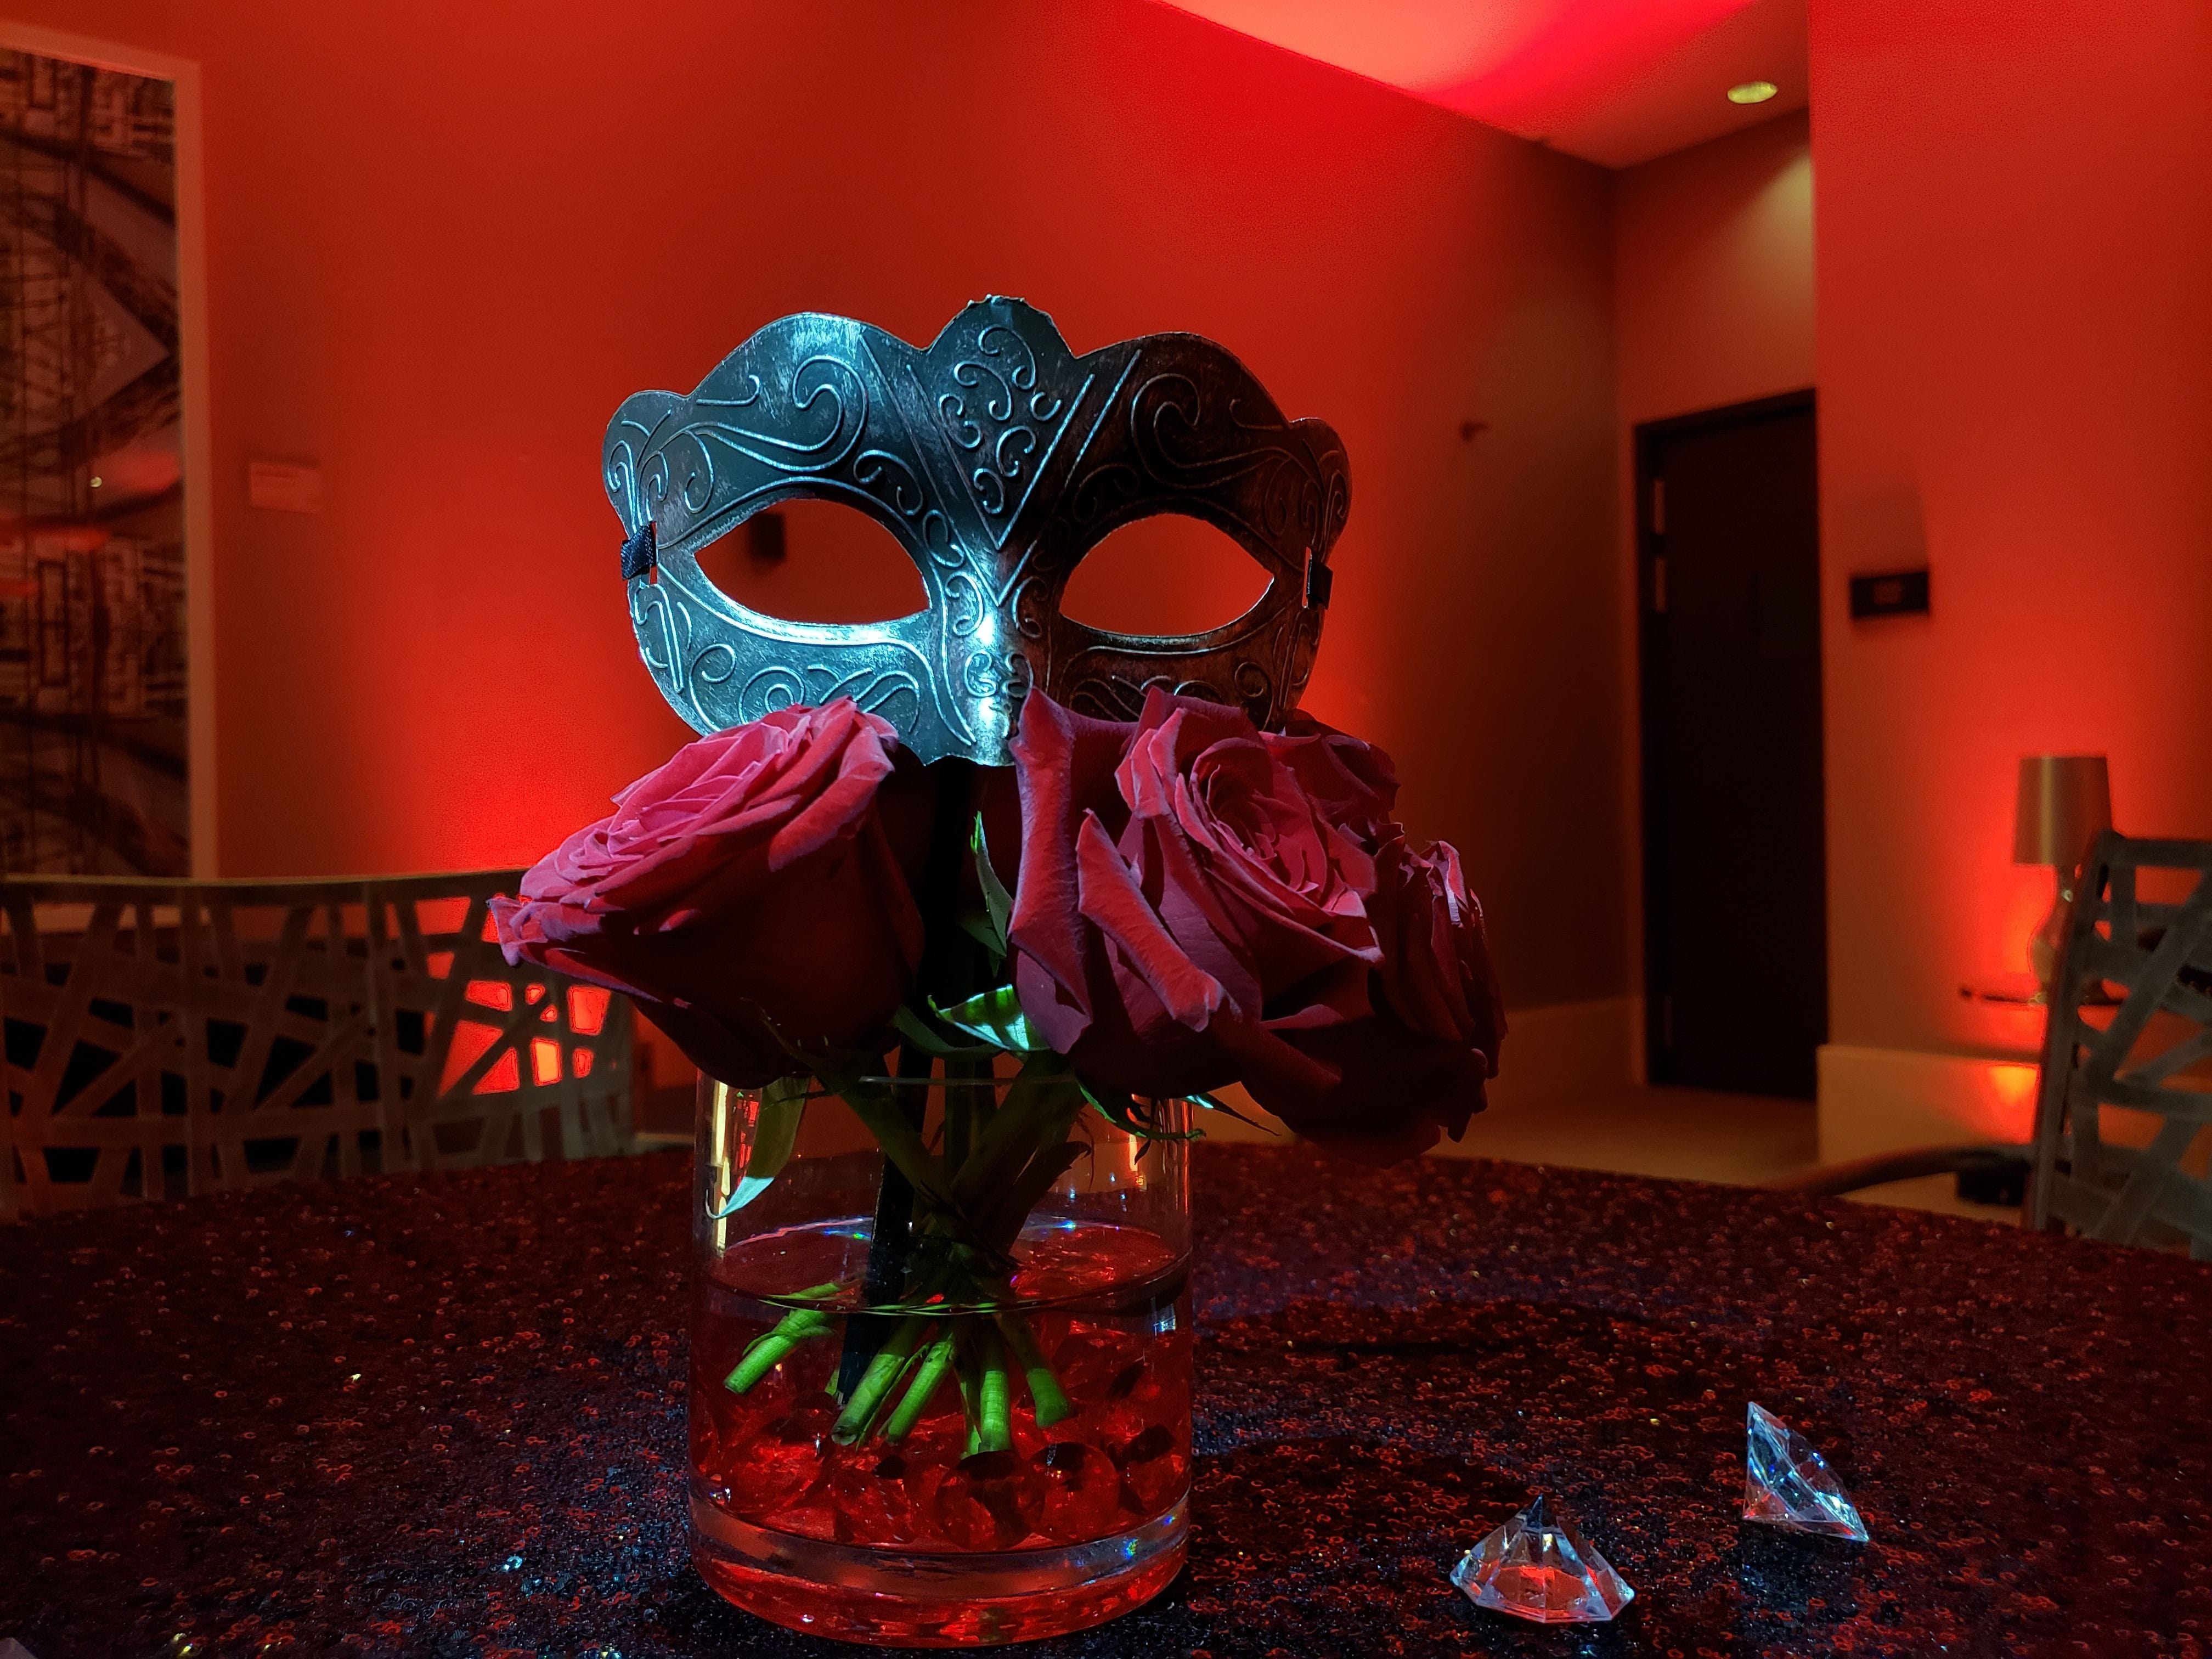 Masquerade ball. Up lighting in red. Pin spot on mask centerpeice.